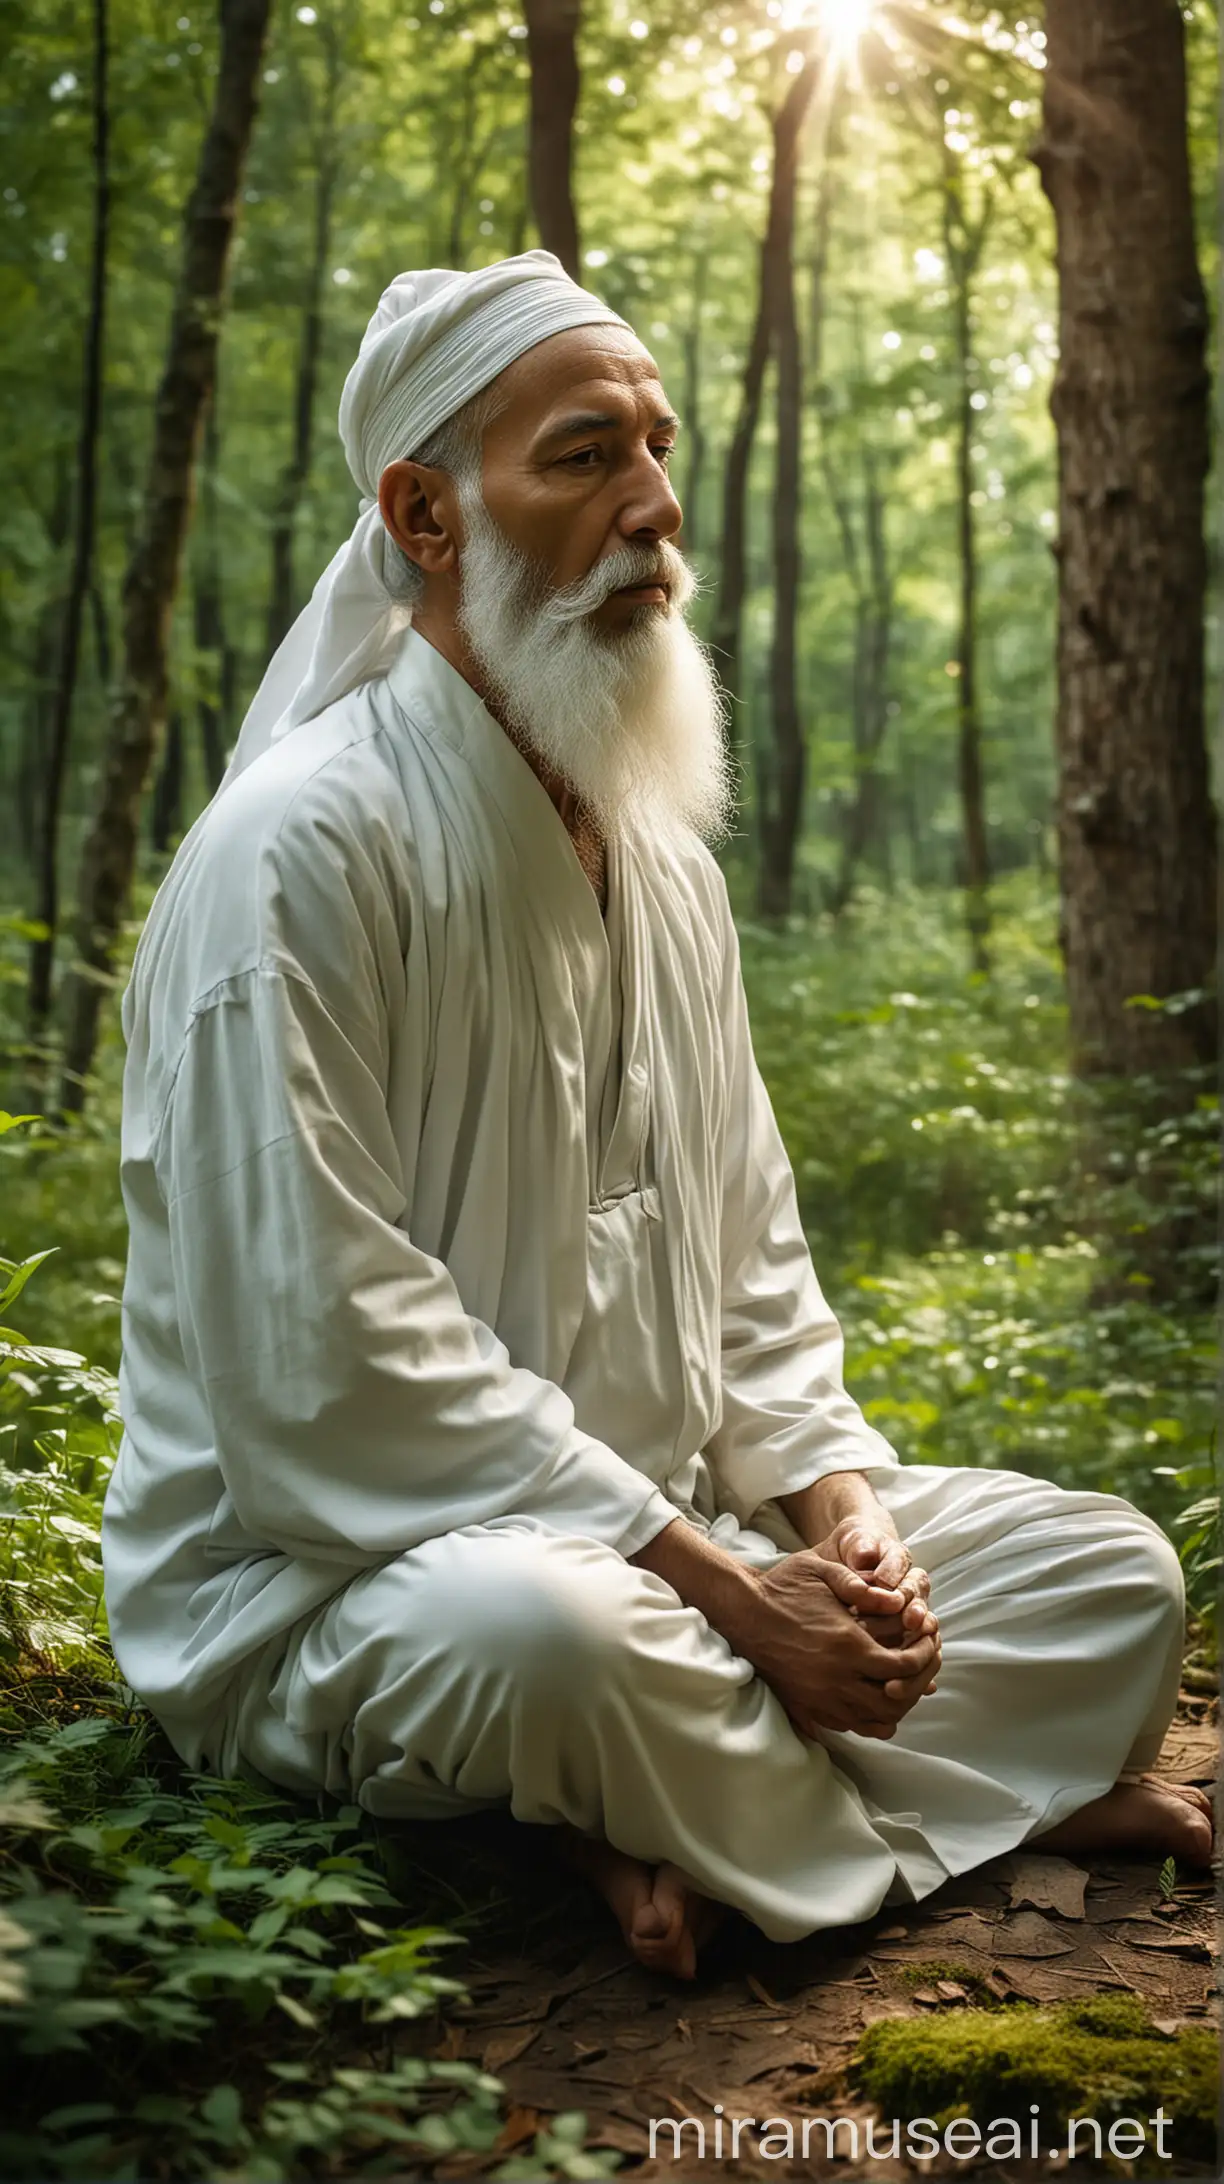 Create an image of Yunus Emre, a wise and serene dervish, sitting in deep meditation in a lush, green forest. He should have a long white beard and wear traditional Sufi clothing. The forest is peaceful, with sunlight filtering through the trees, and Yunus Emre exudes a sense of calm and spiritual depth.

